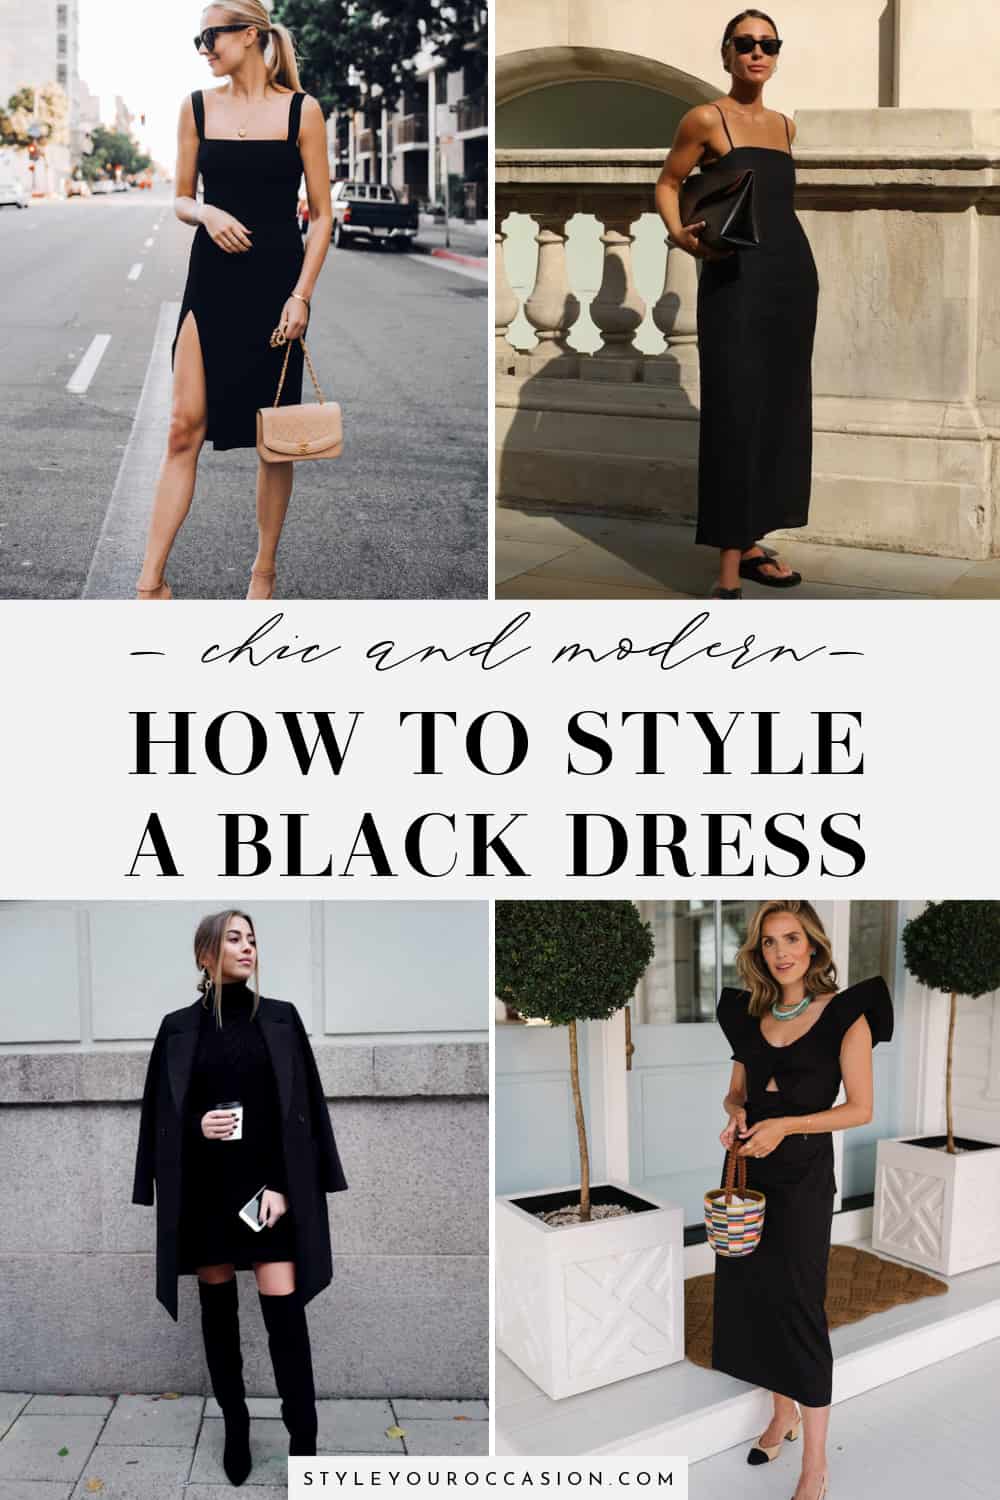 What Shoes To Wear With Black Dress + Stunning Looks To Steal!